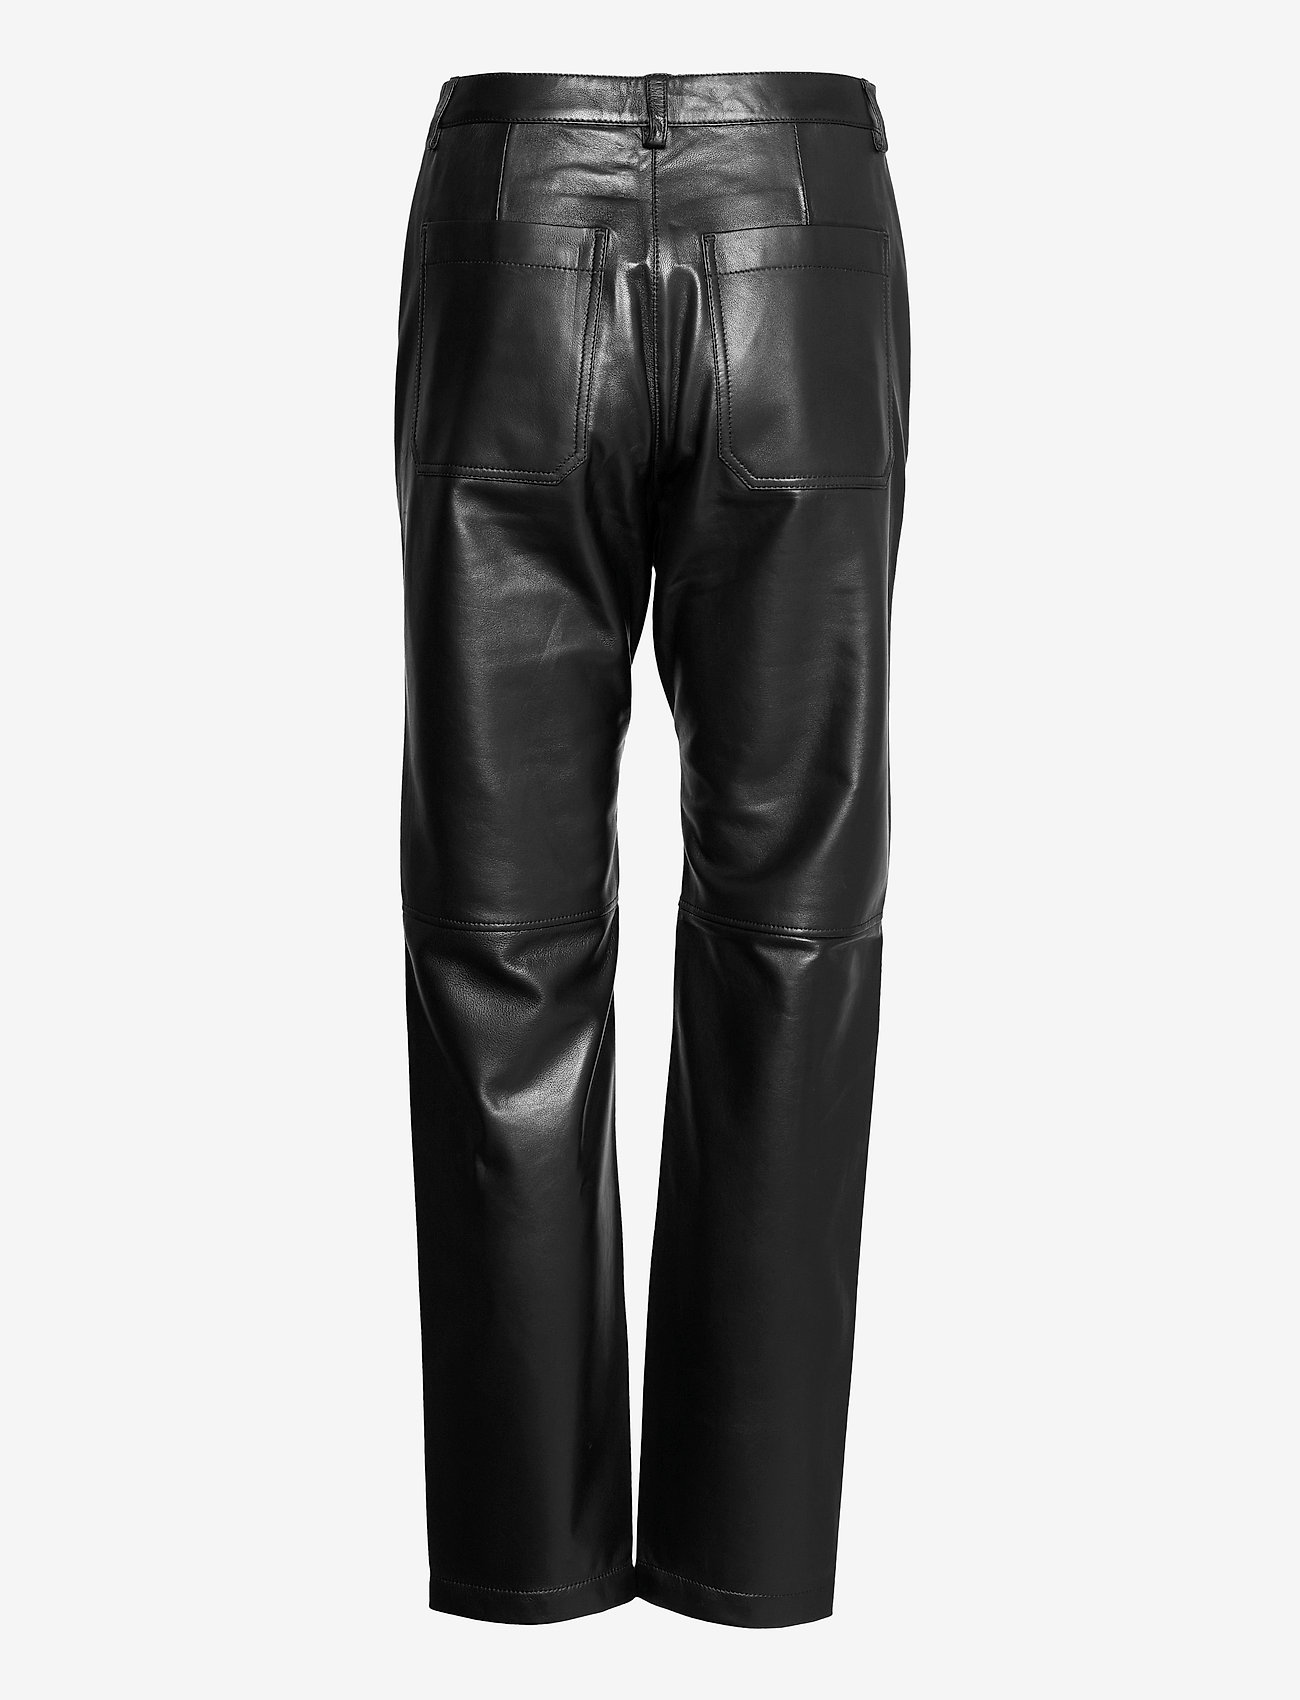 Wood Wood Fiona Leather Trousers - Leather trousers | Boozt.com